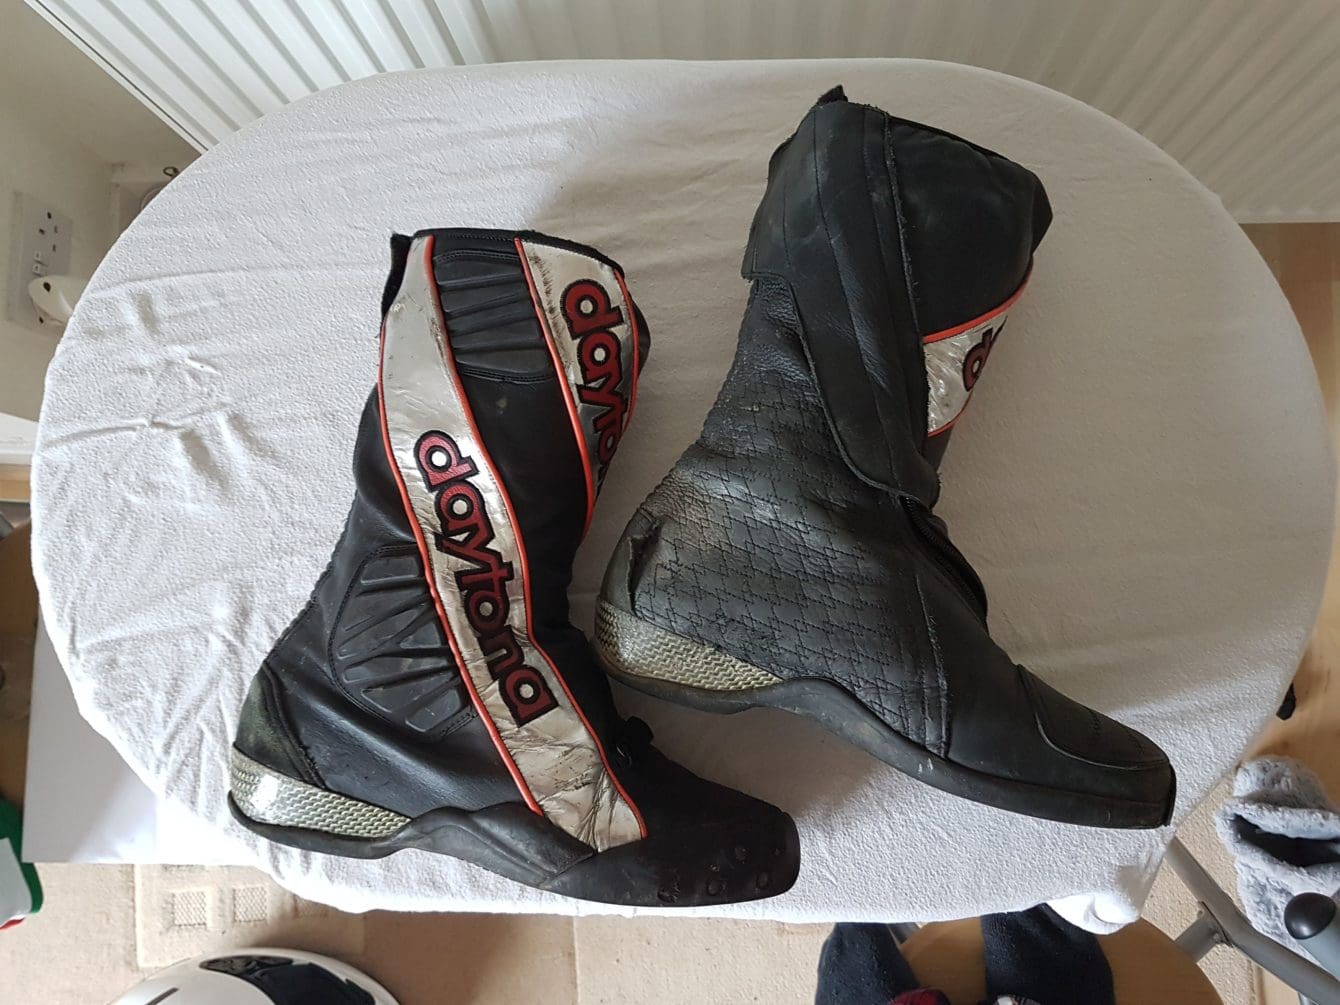 USED & ABUSED: DAYTONA SECURITY EVO RACING BOOTS REVIEWED! - Fast 